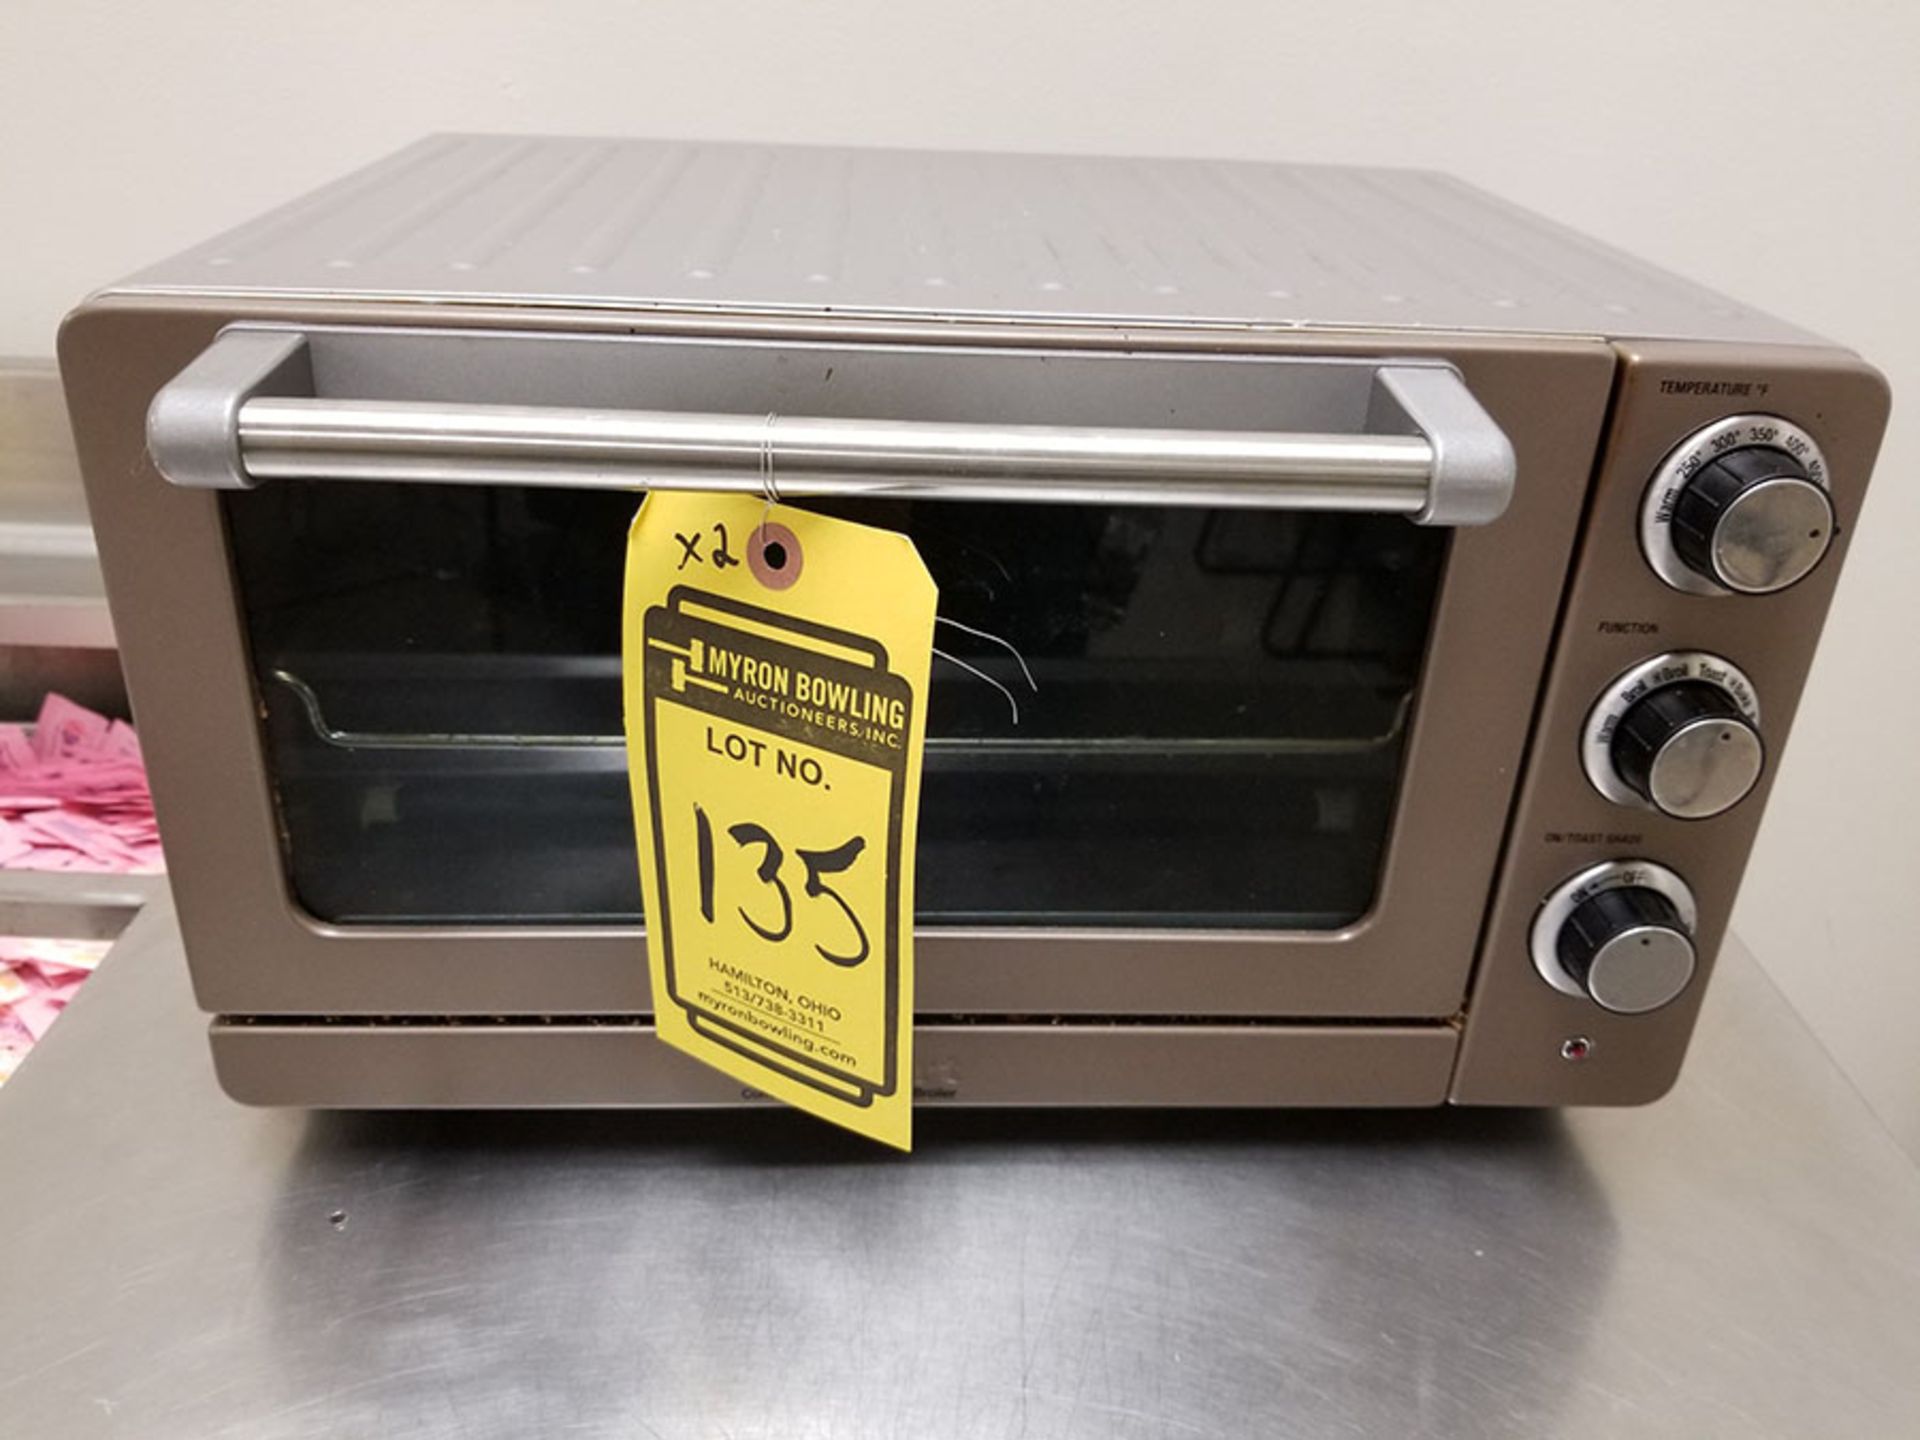 (2) TOASTER OVENS